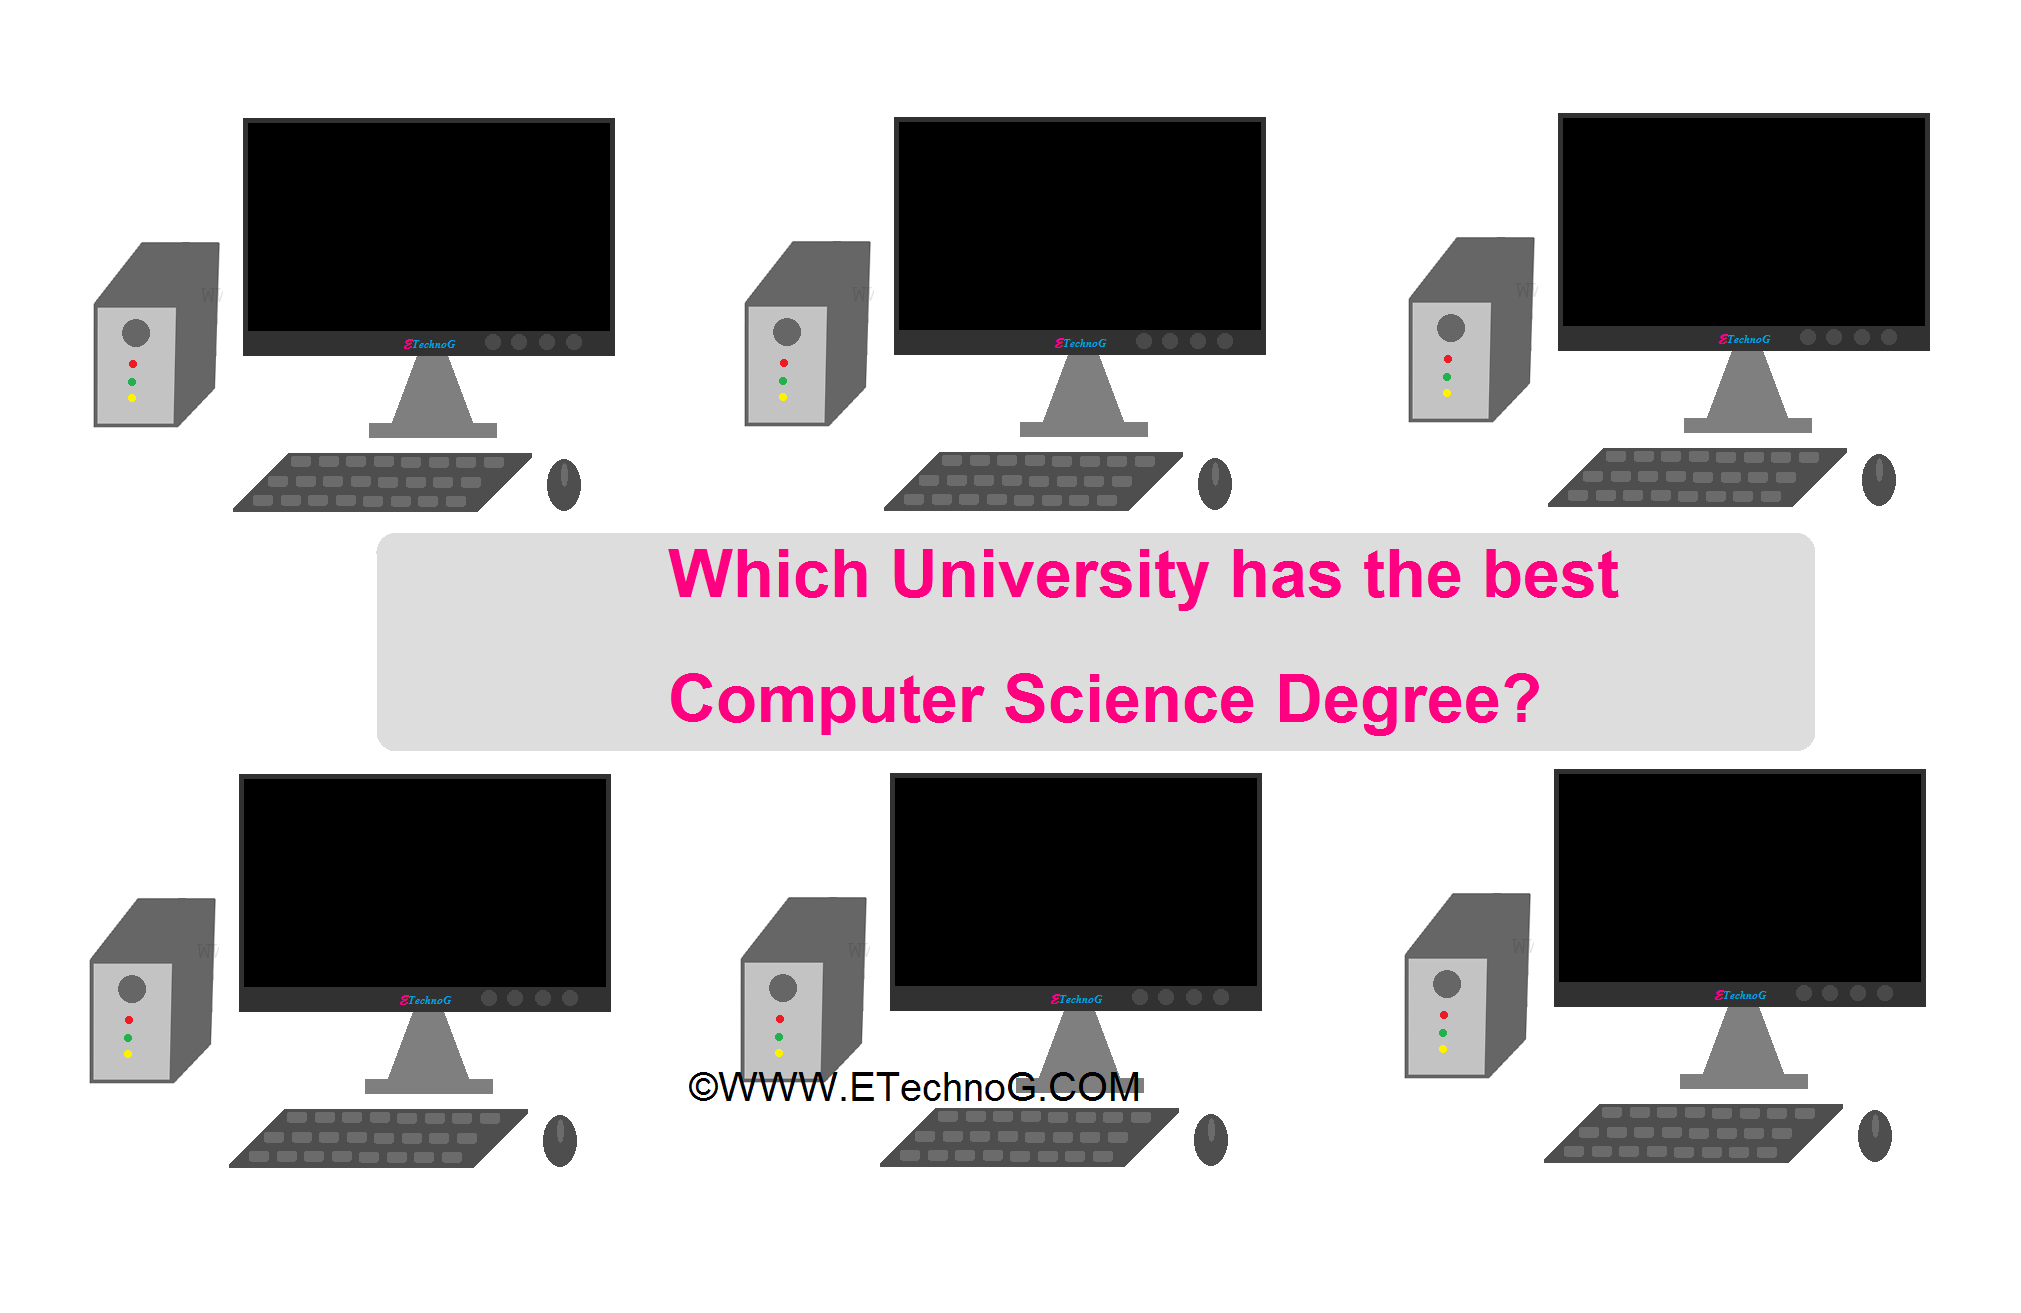 which university has the best computer science degree